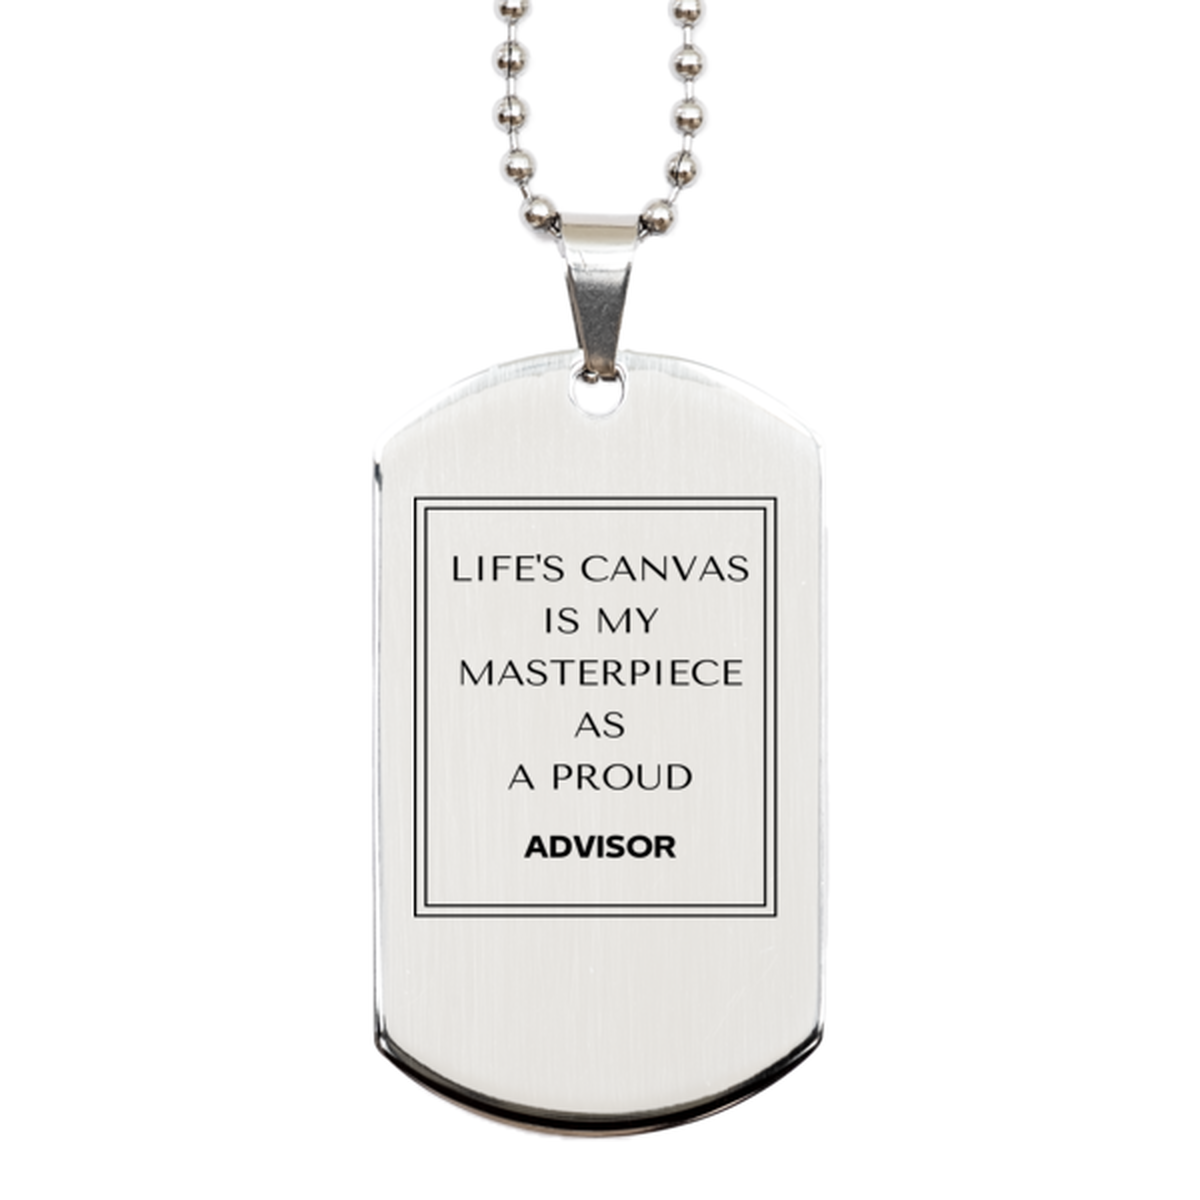 Proud Advisor Gifts, Life's canvas is my masterpiece, Epic Birthday Christmas Unique Silver Dog Tag For Advisor, Coworkers, Men, Women, Friends